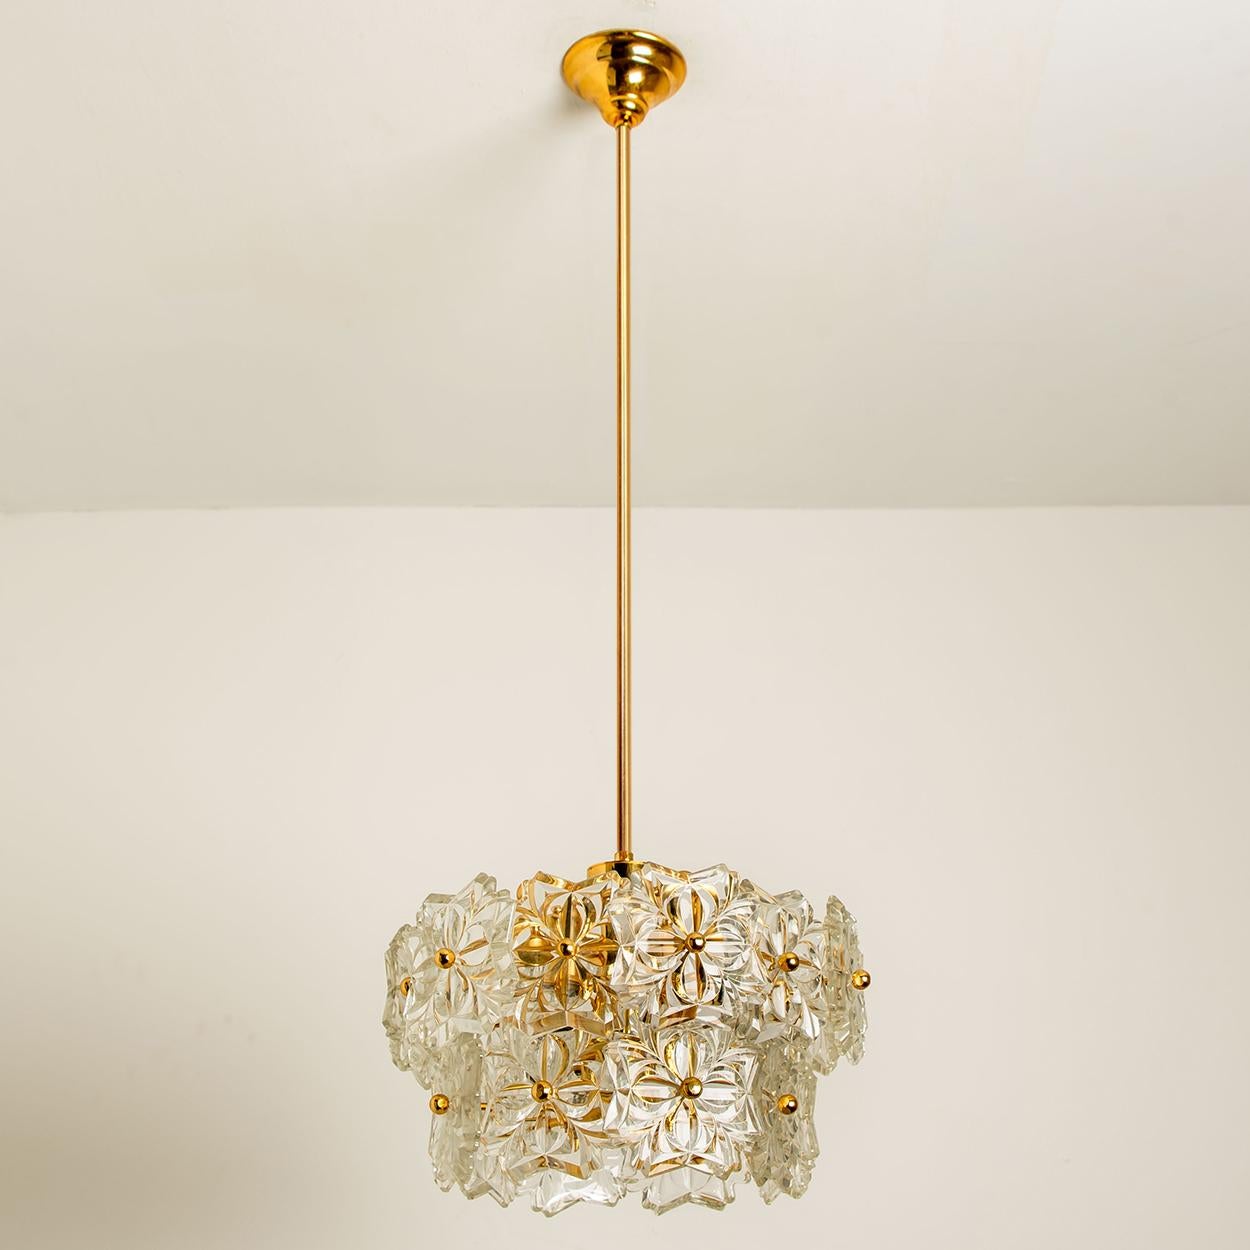 Sculptural chandelier with a design of a bouquet of textured glass flowers . Manufactured in mid century, circa 1970 (late 1960s or early 1970s).

The fixture has several flower shaped glass shades. Each clear glass flower shade has textured